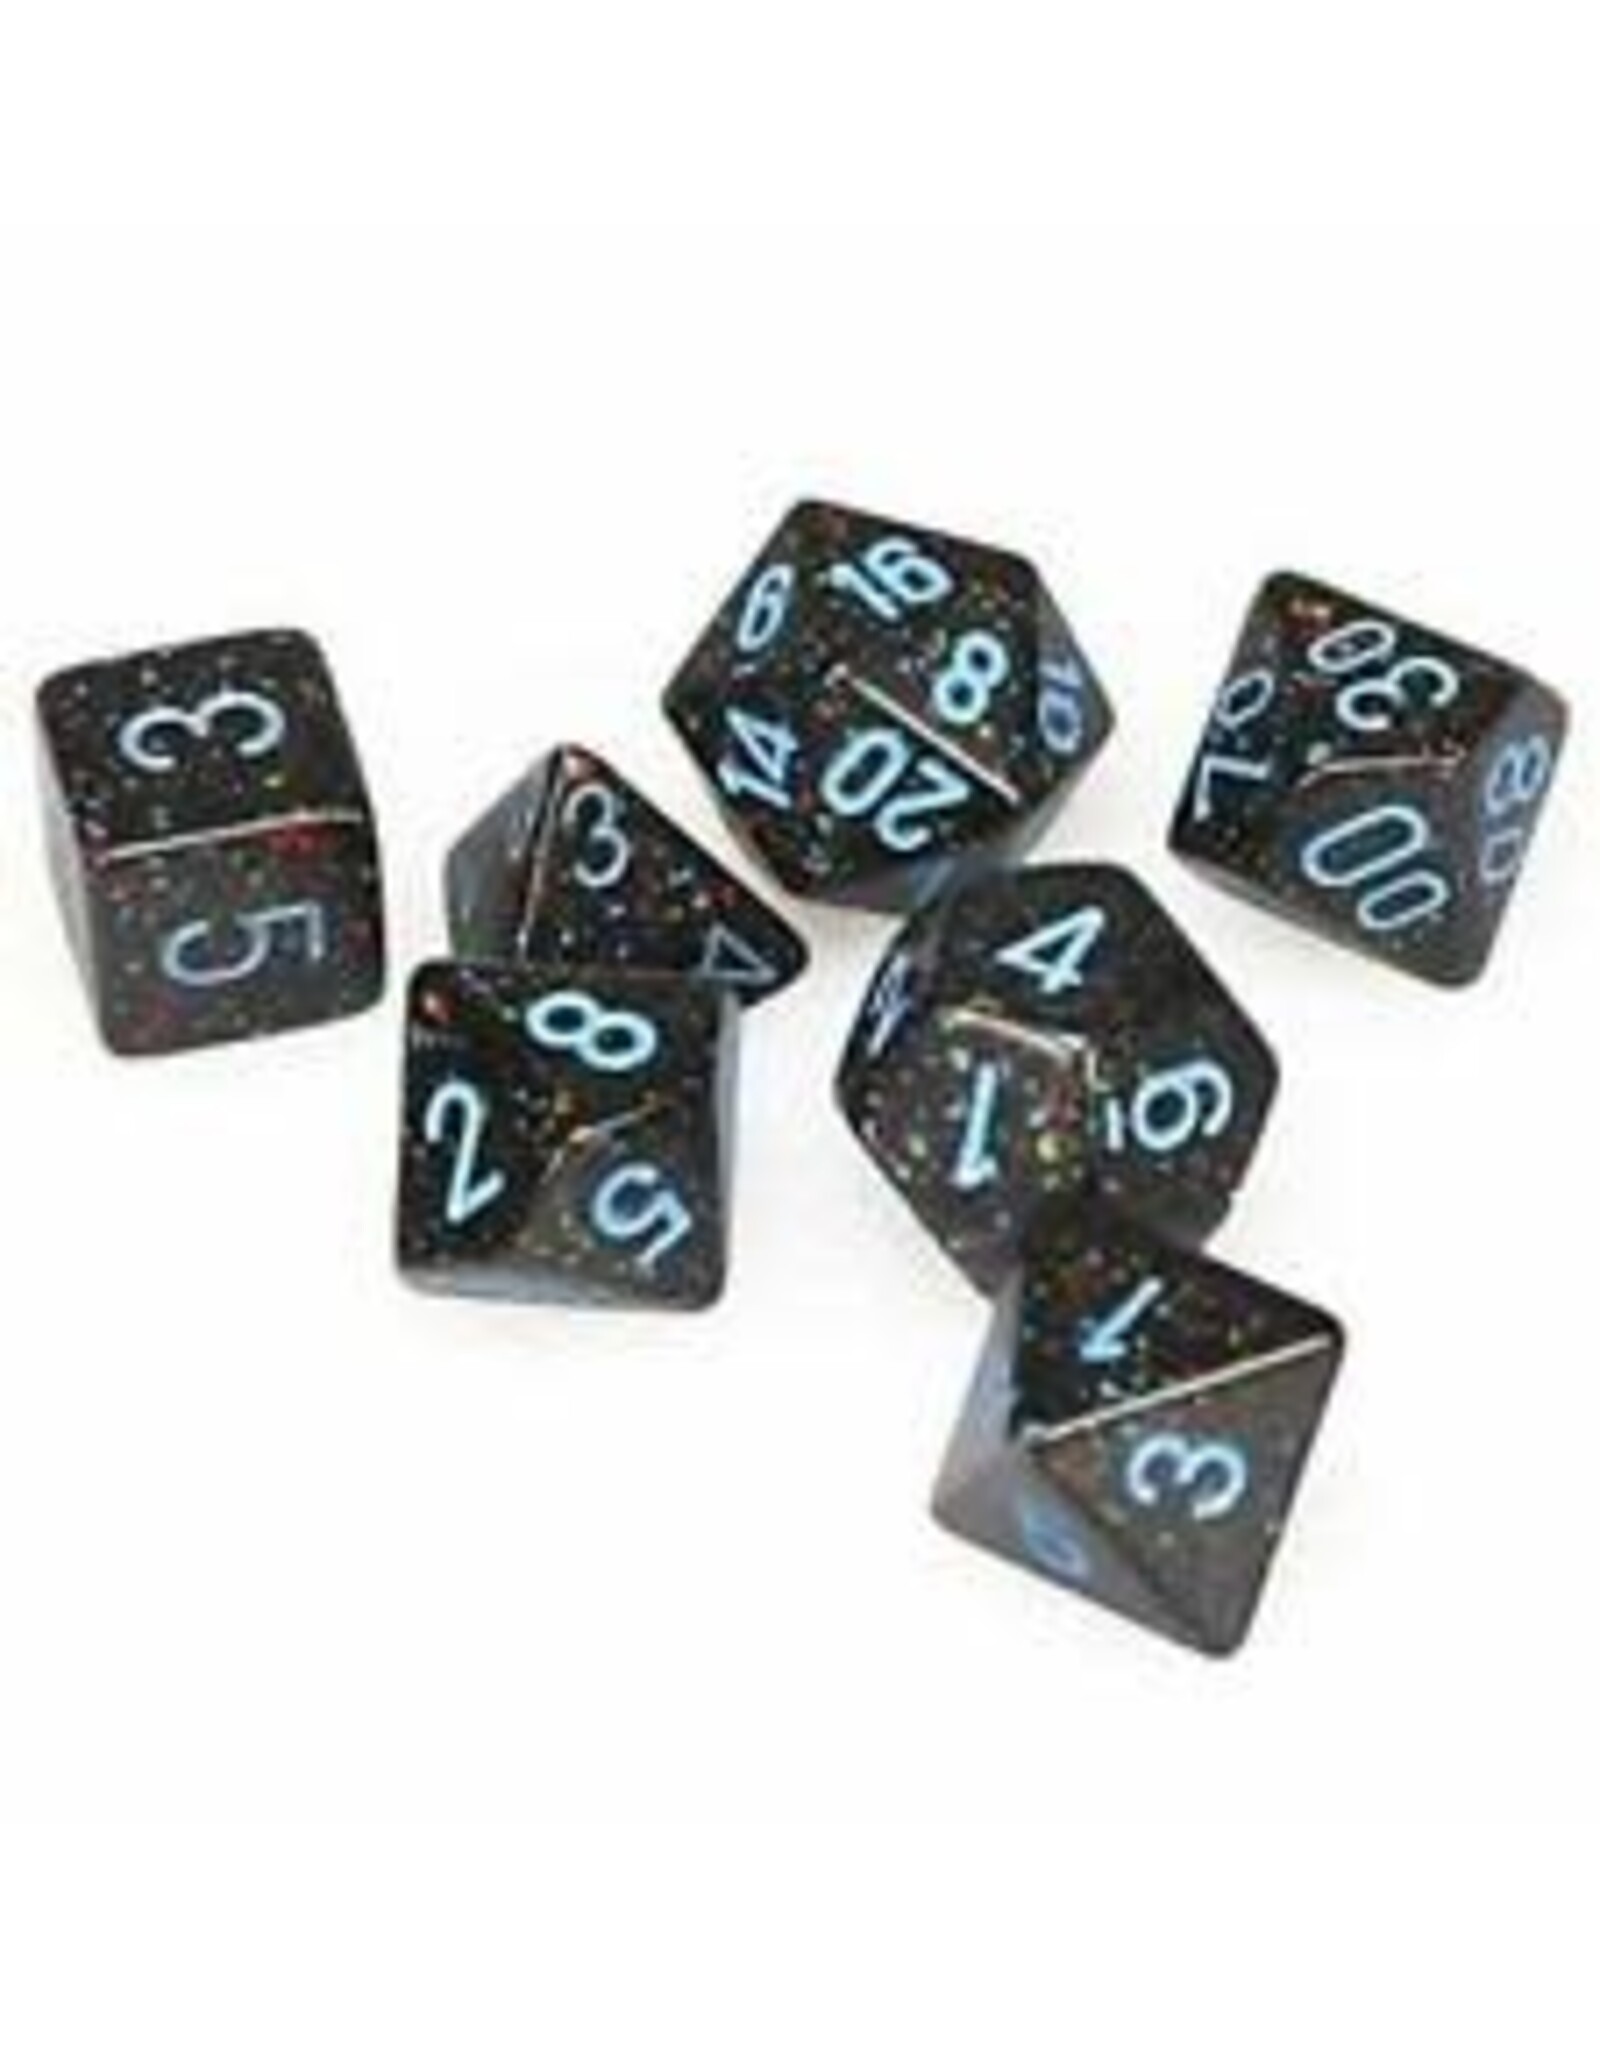 Chessex Blue Stars Speckled Poly 7 dice set